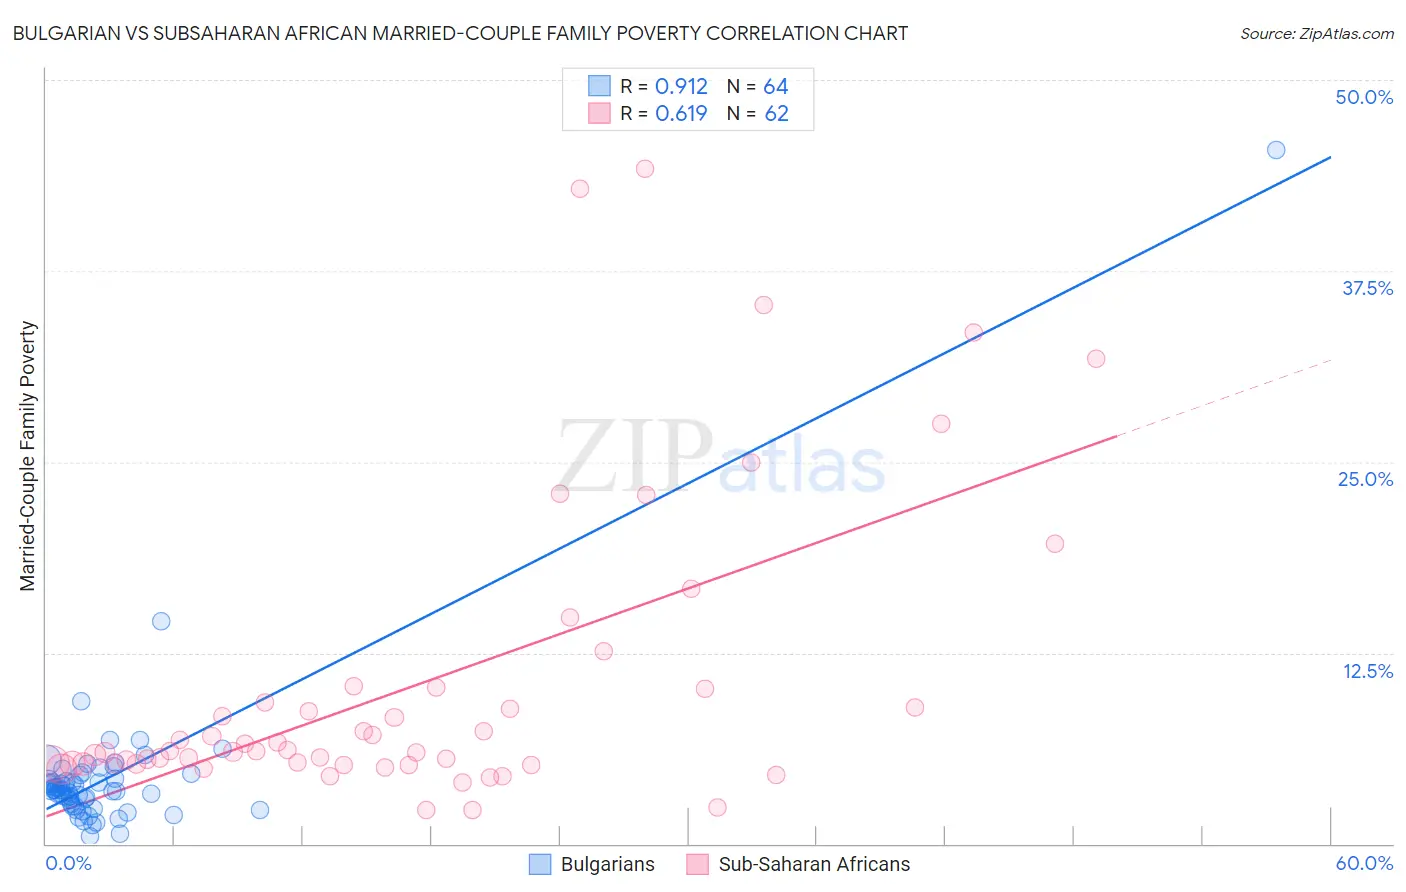 Bulgarian vs Subsaharan African Married-Couple Family Poverty